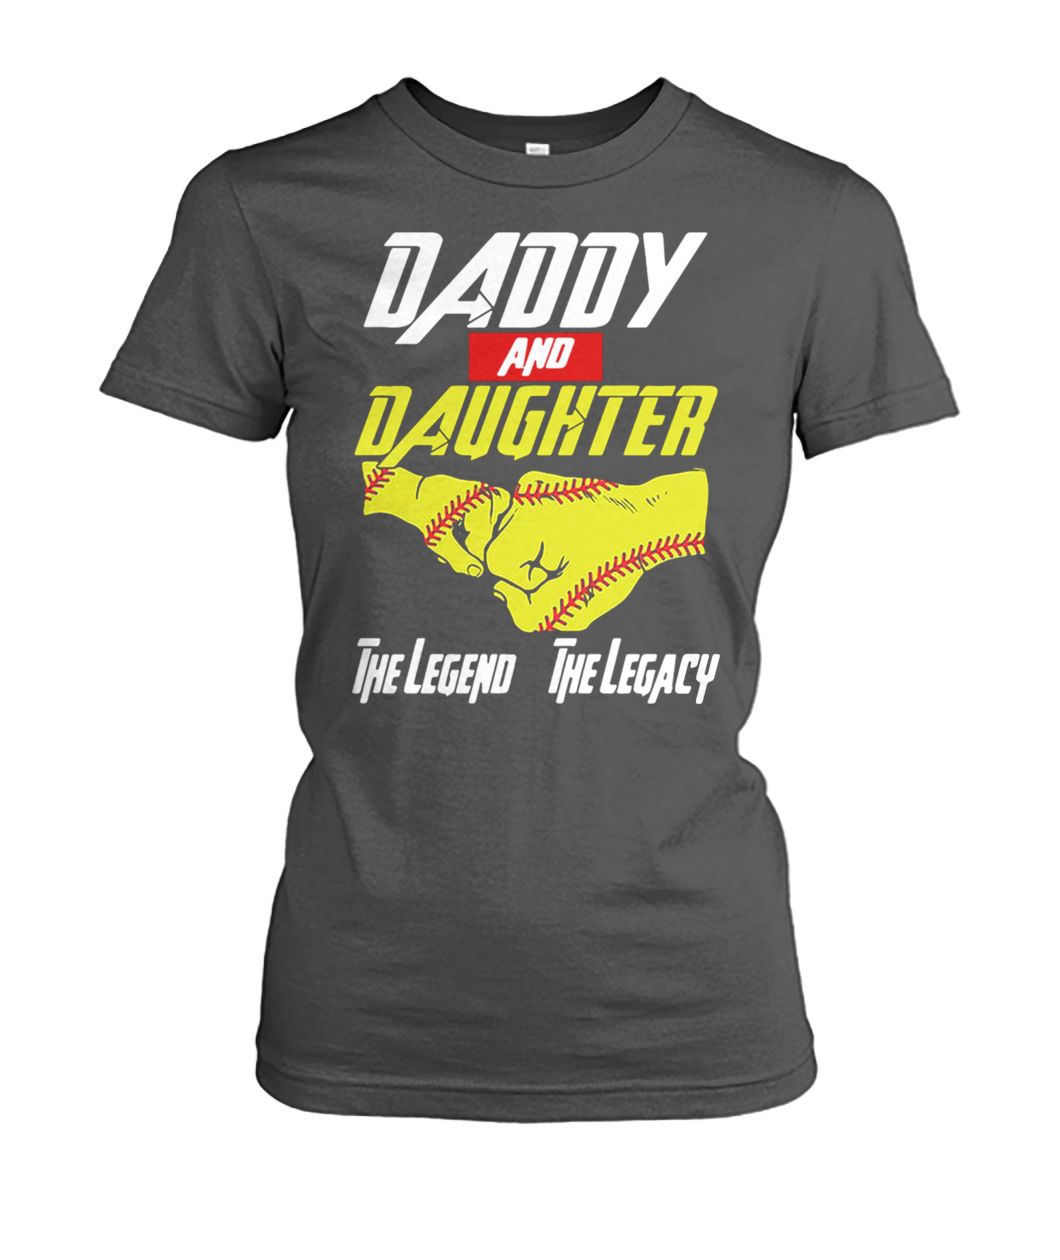 Baseball daddy and daughter the legend and the legacy marvel avengers women's crew tee